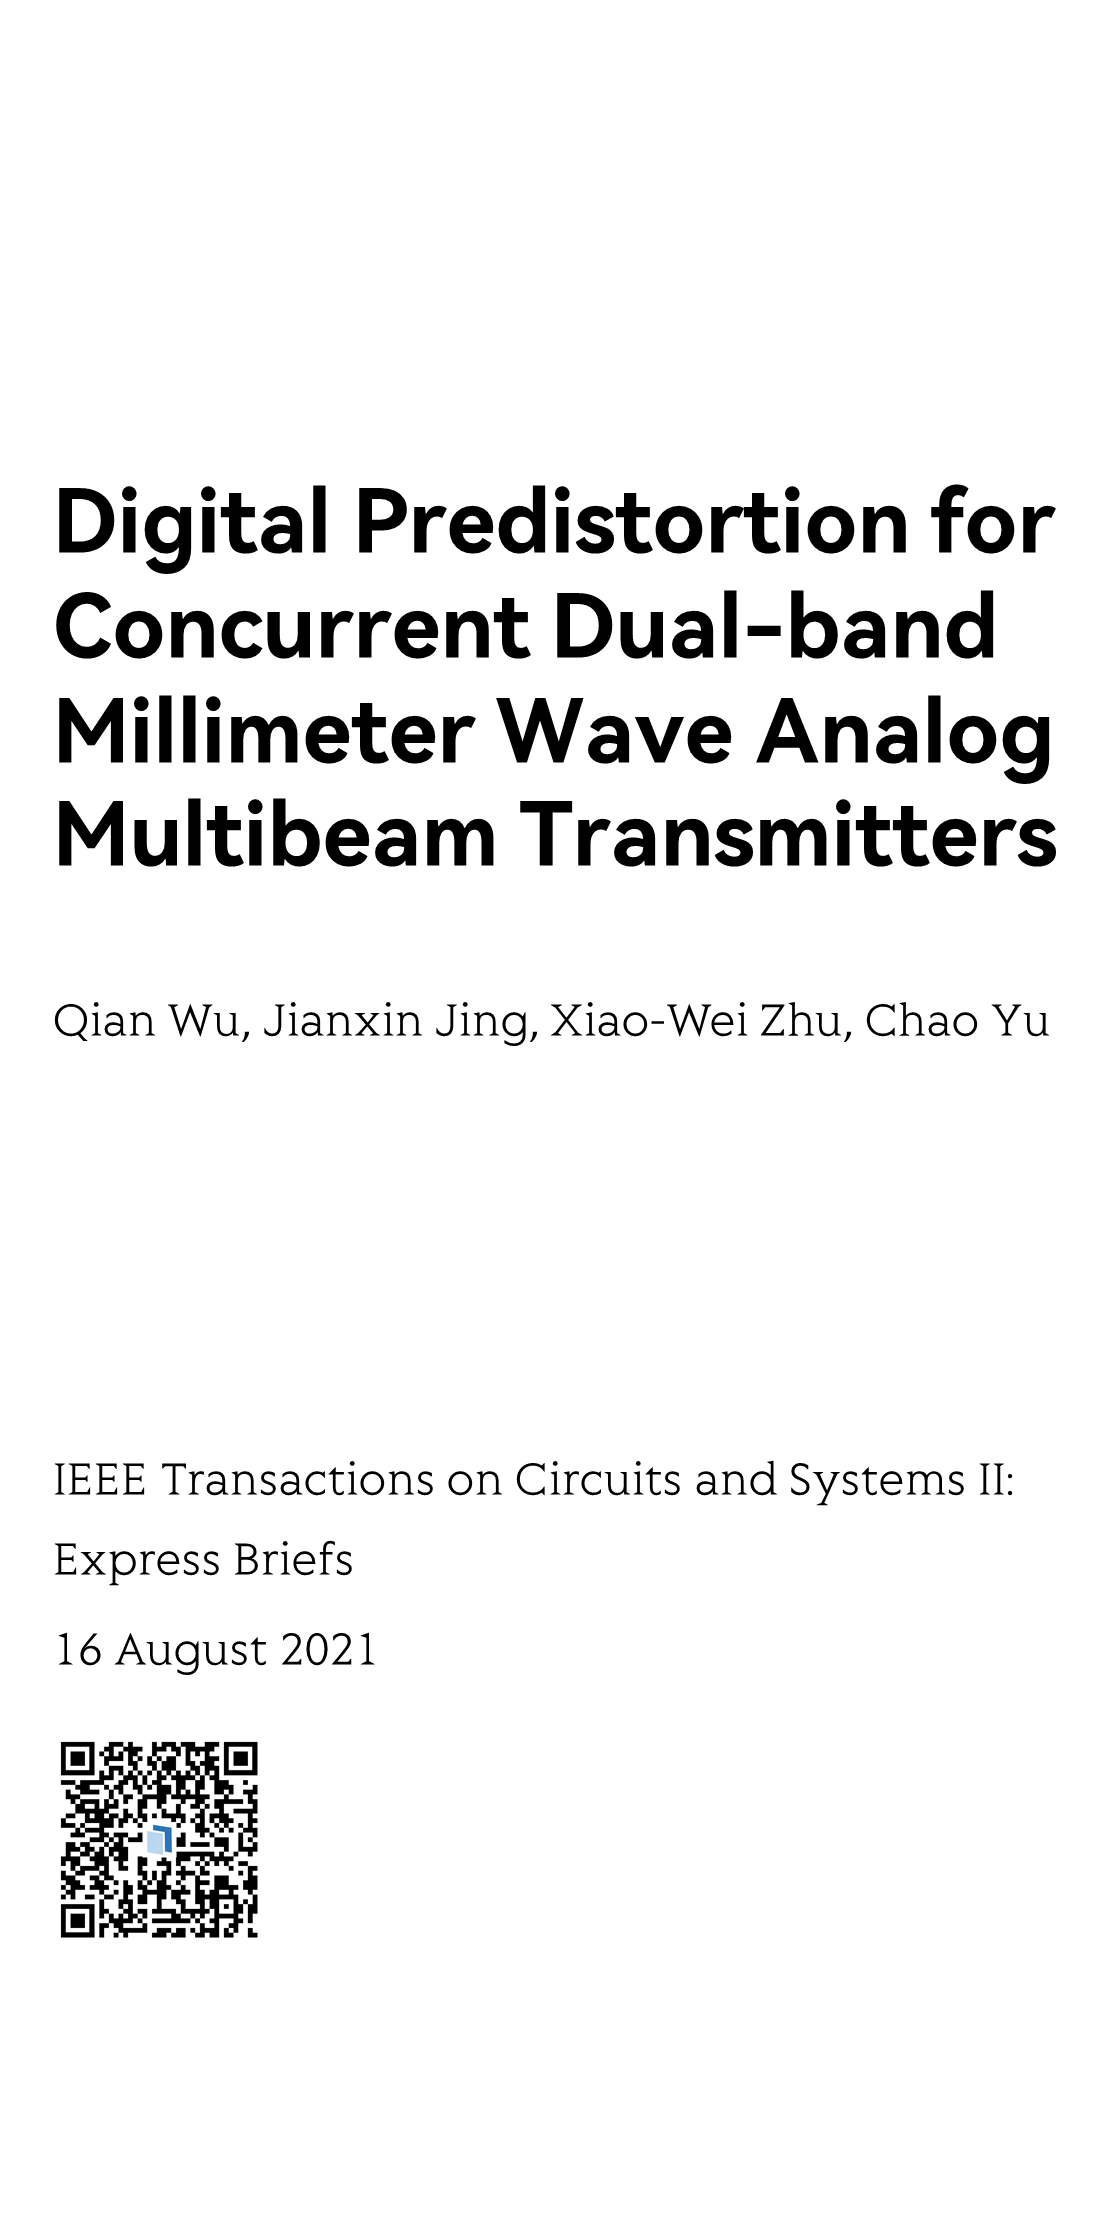 IEEE Transactions on Circuits and Systems II: Express Briefs_1